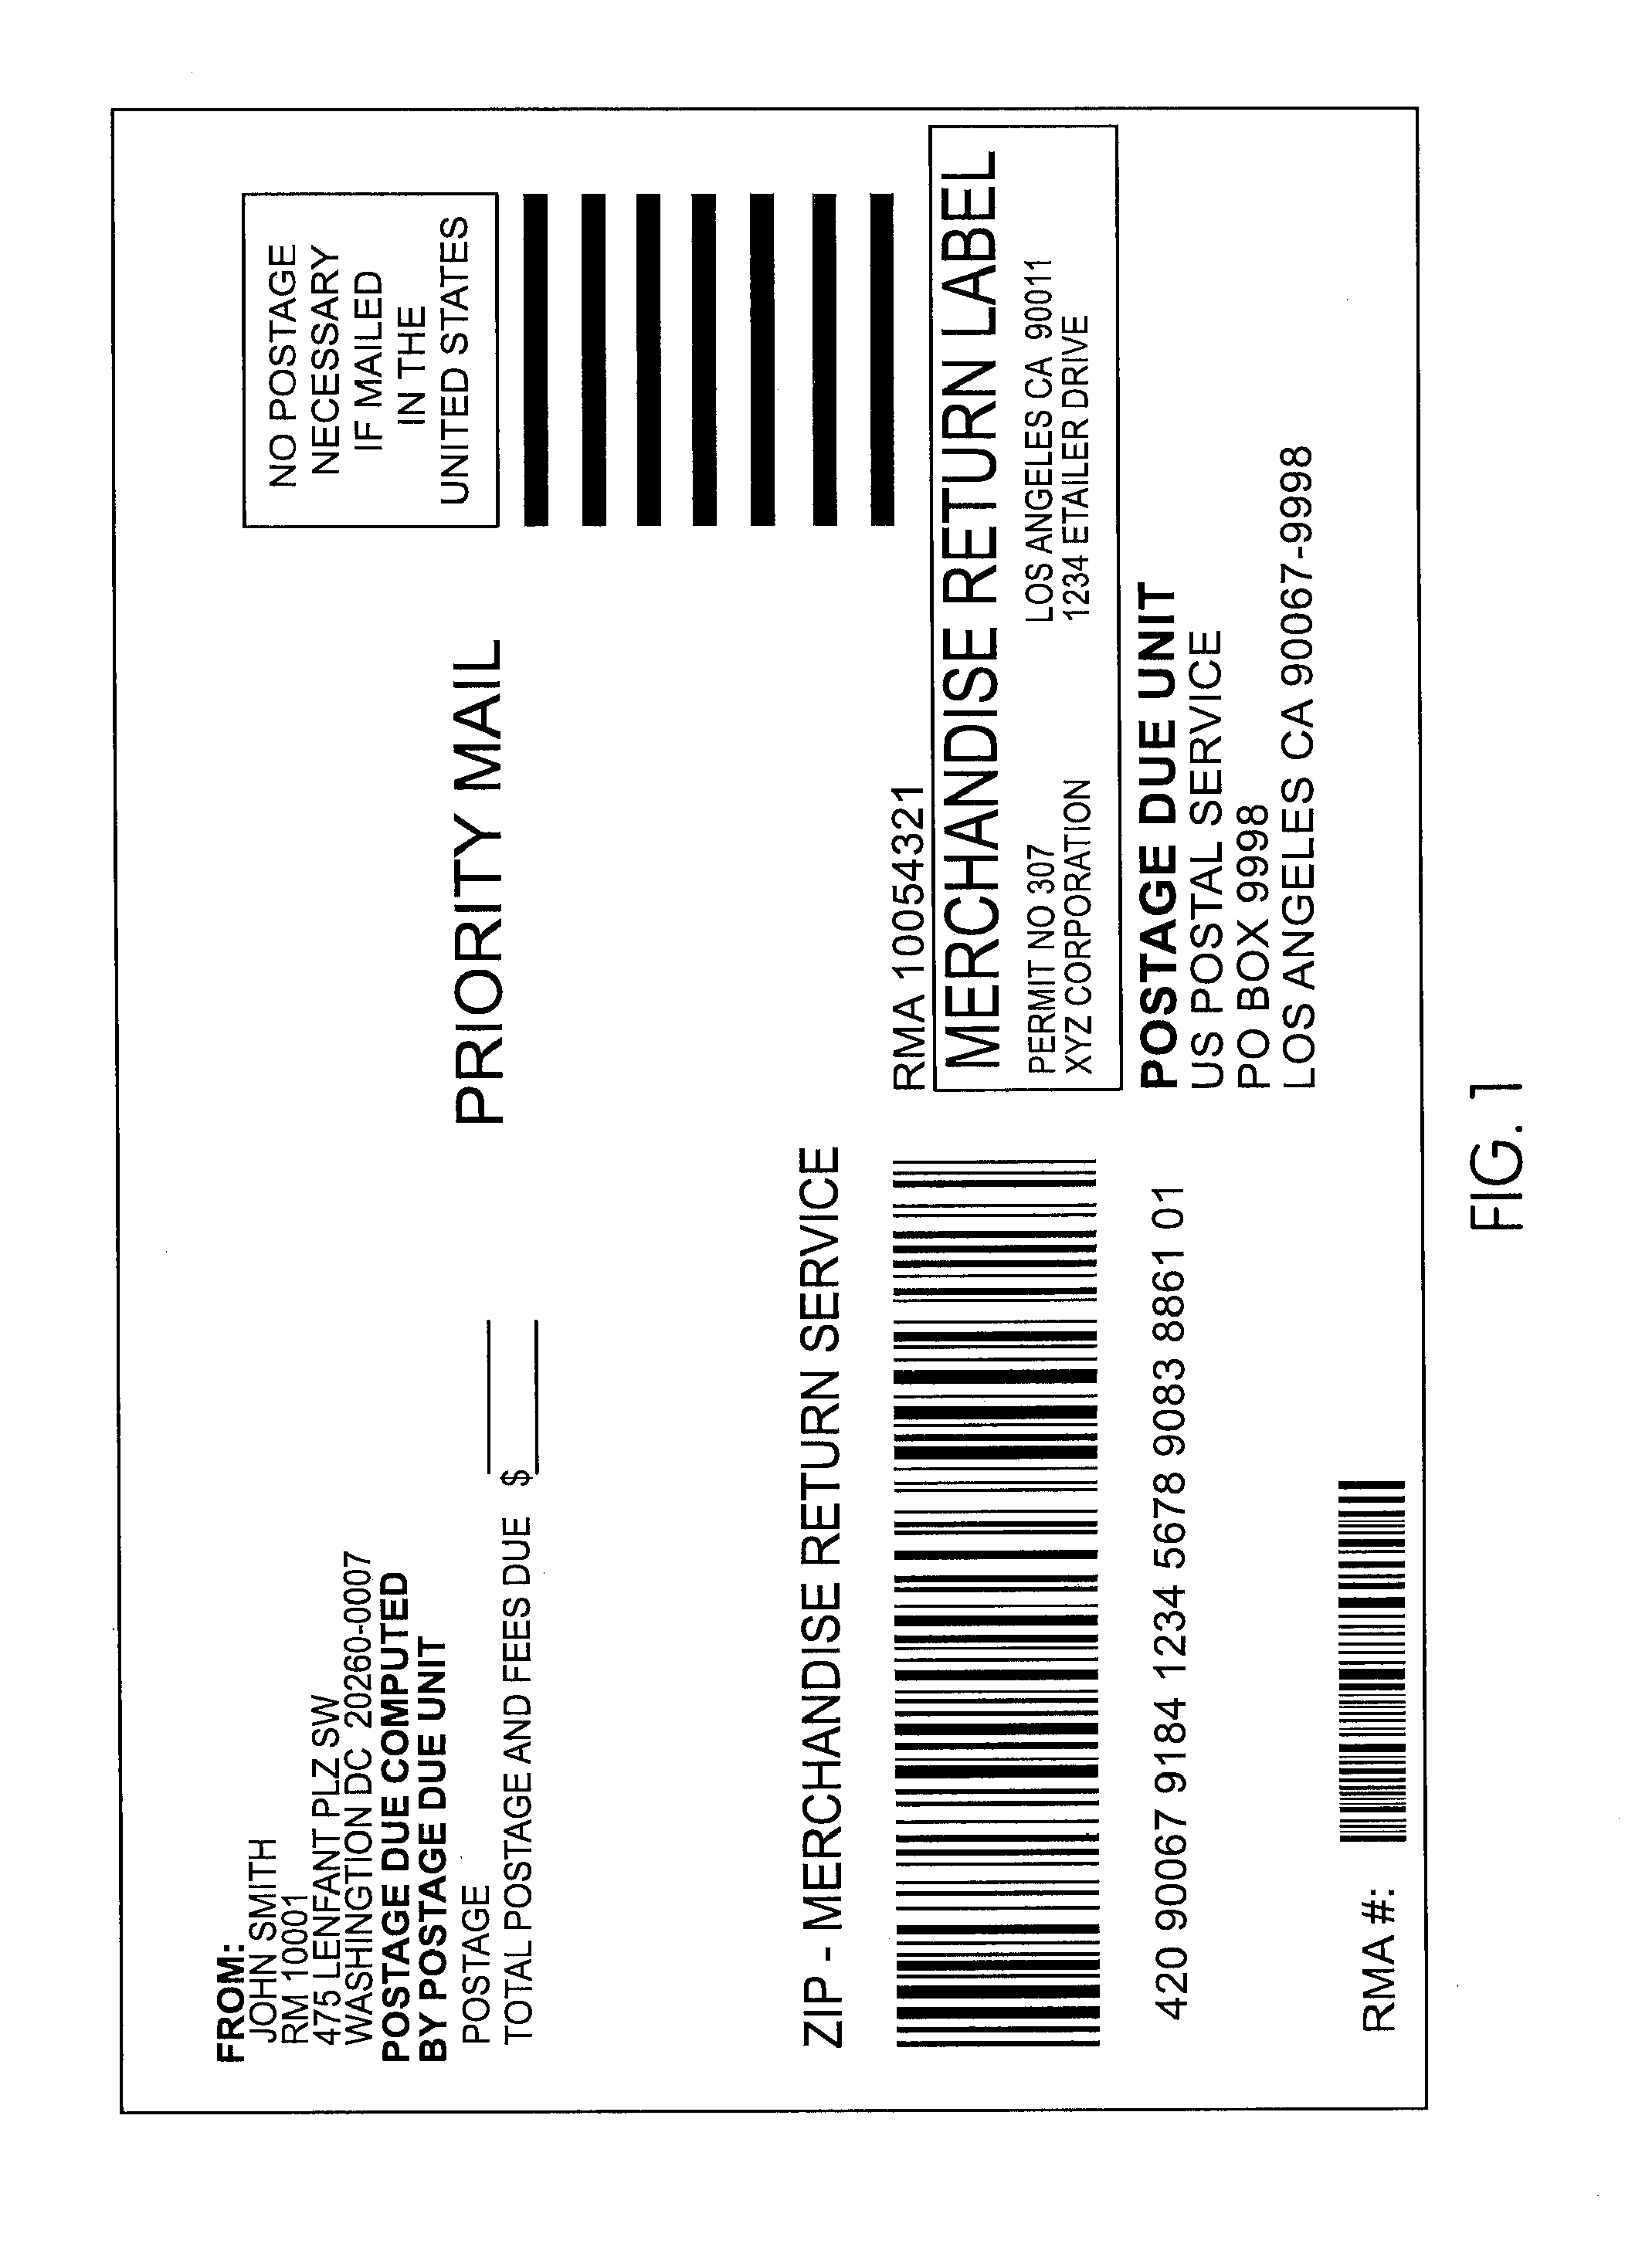 System and method for processing a mailing label